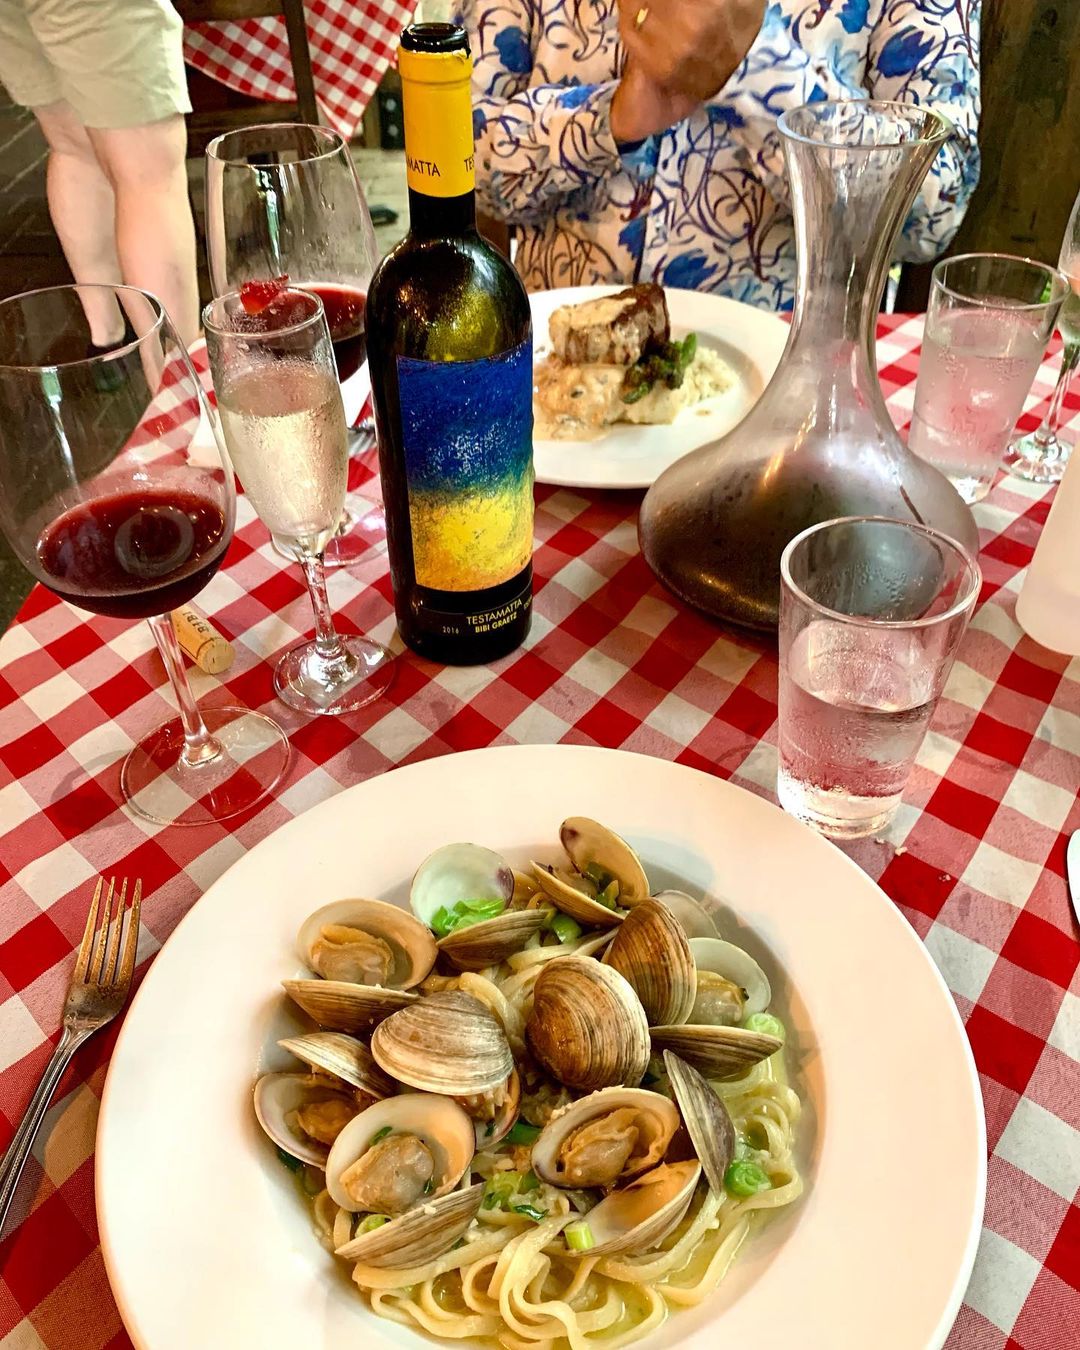 Pasta and Mussels at Pia's Trattoria in Gulfport, FL